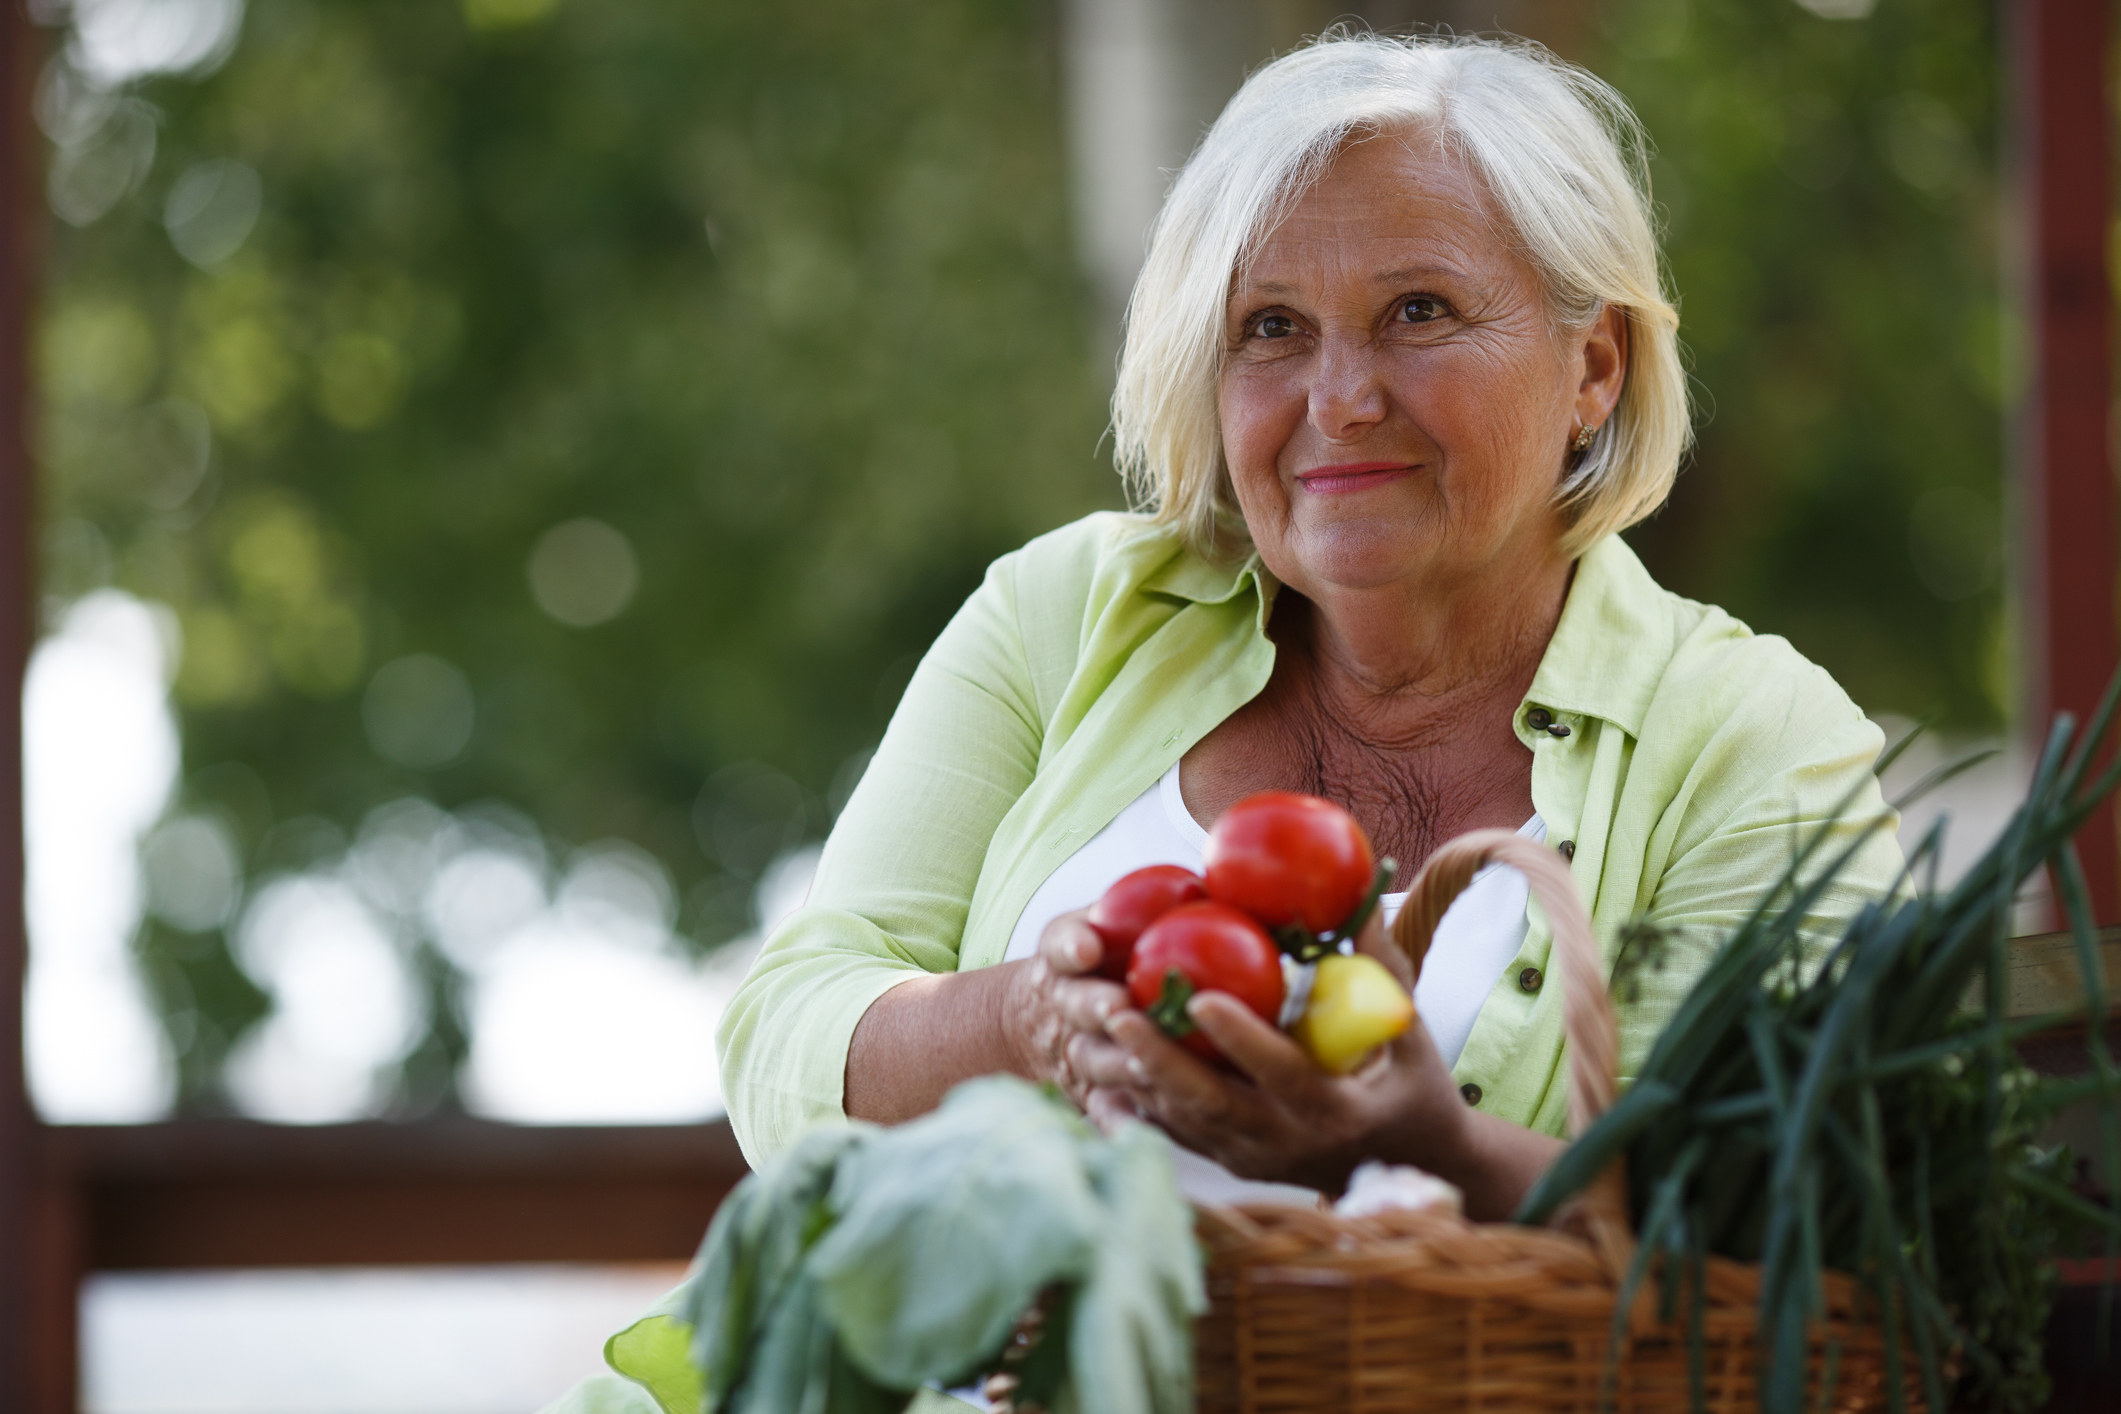 A woman holding produce